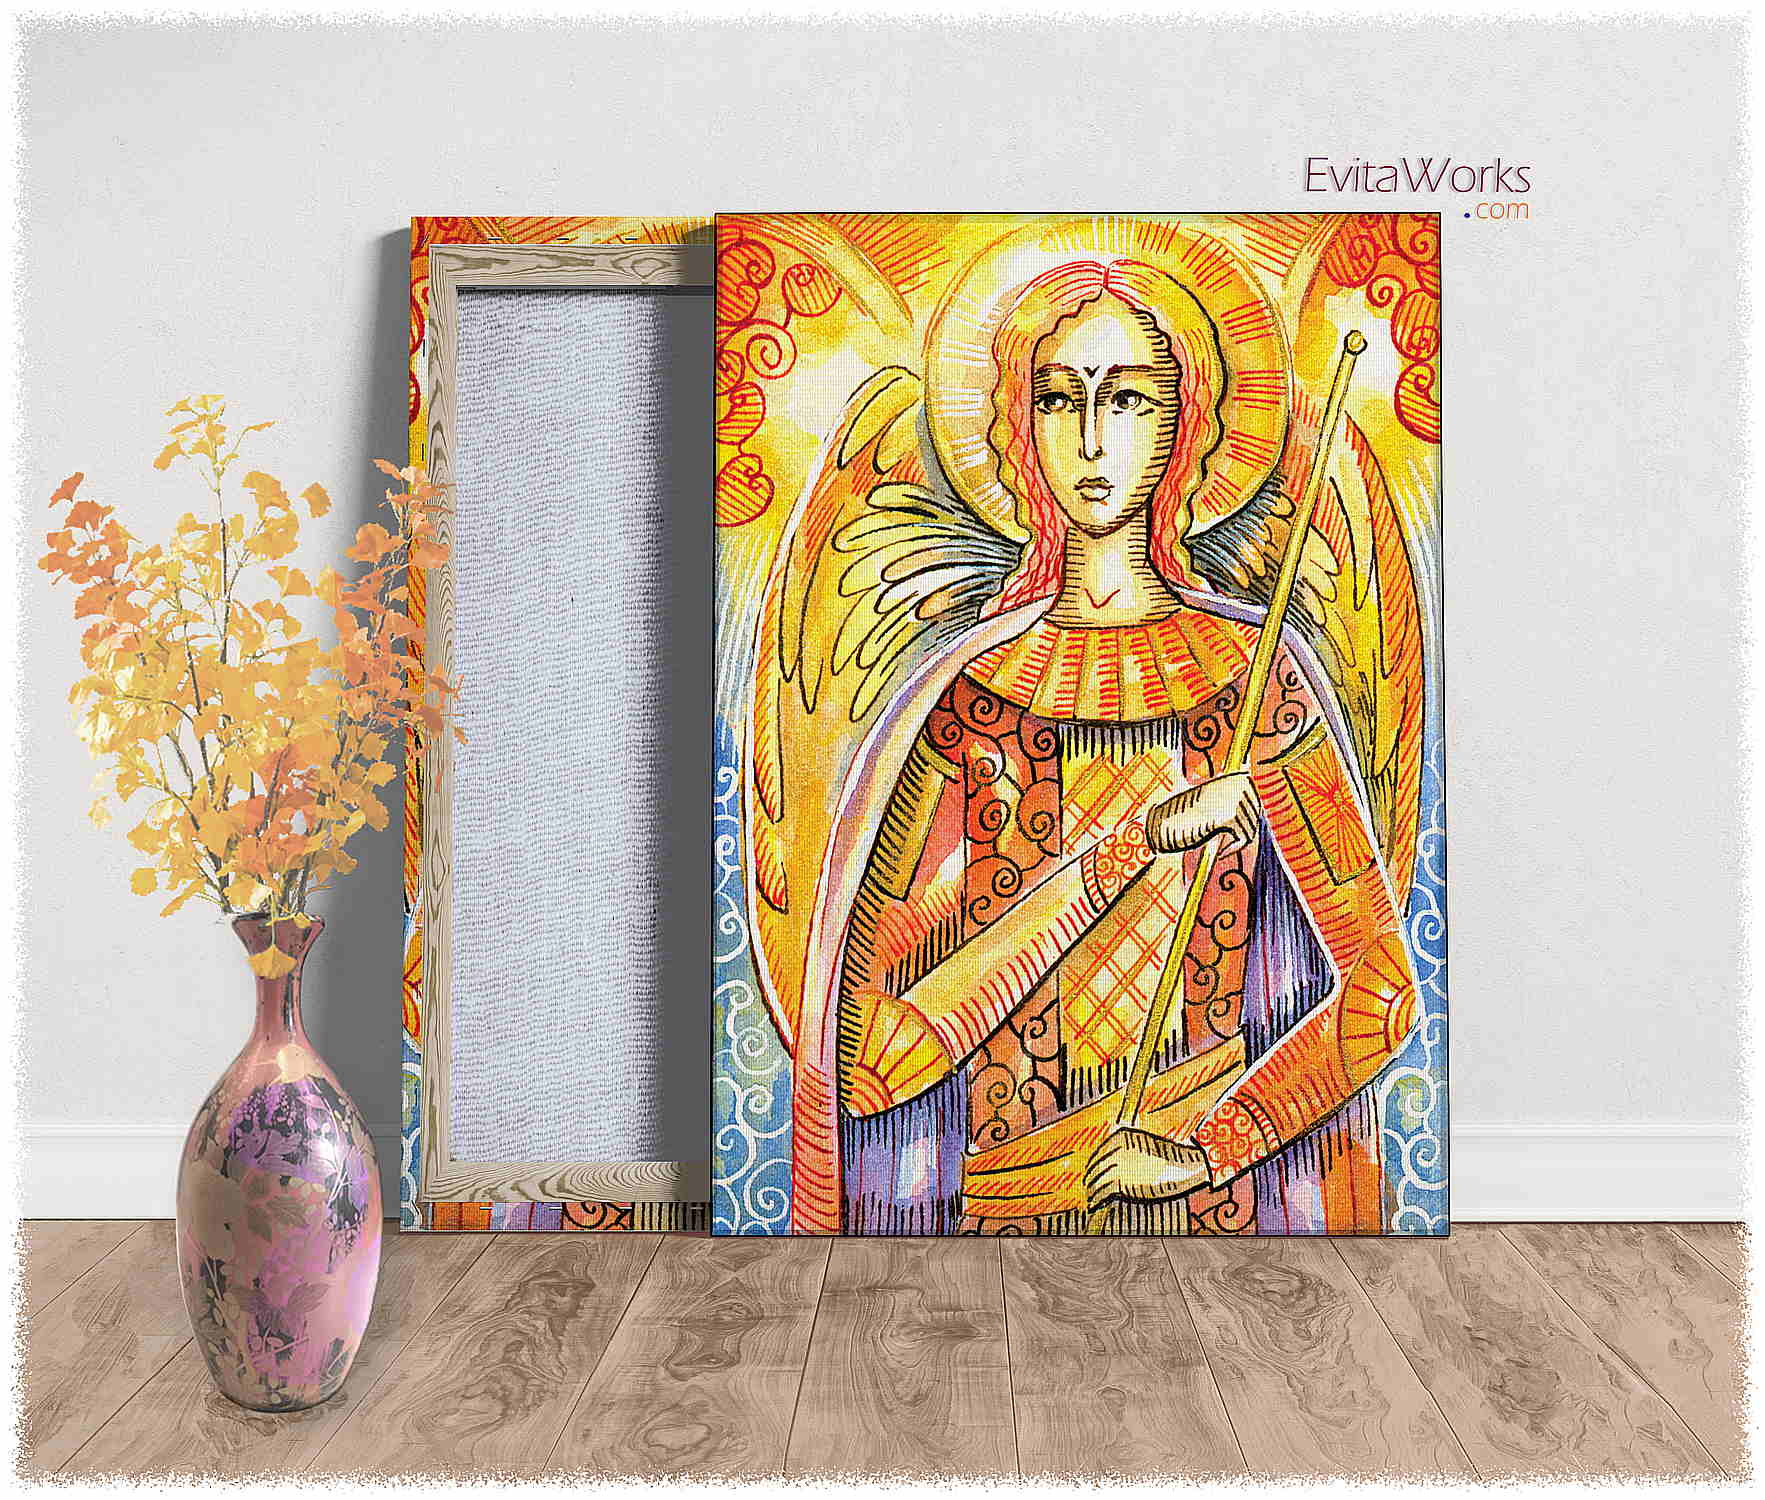 Hit to learn about "Angel 32, Christian art" on canvases